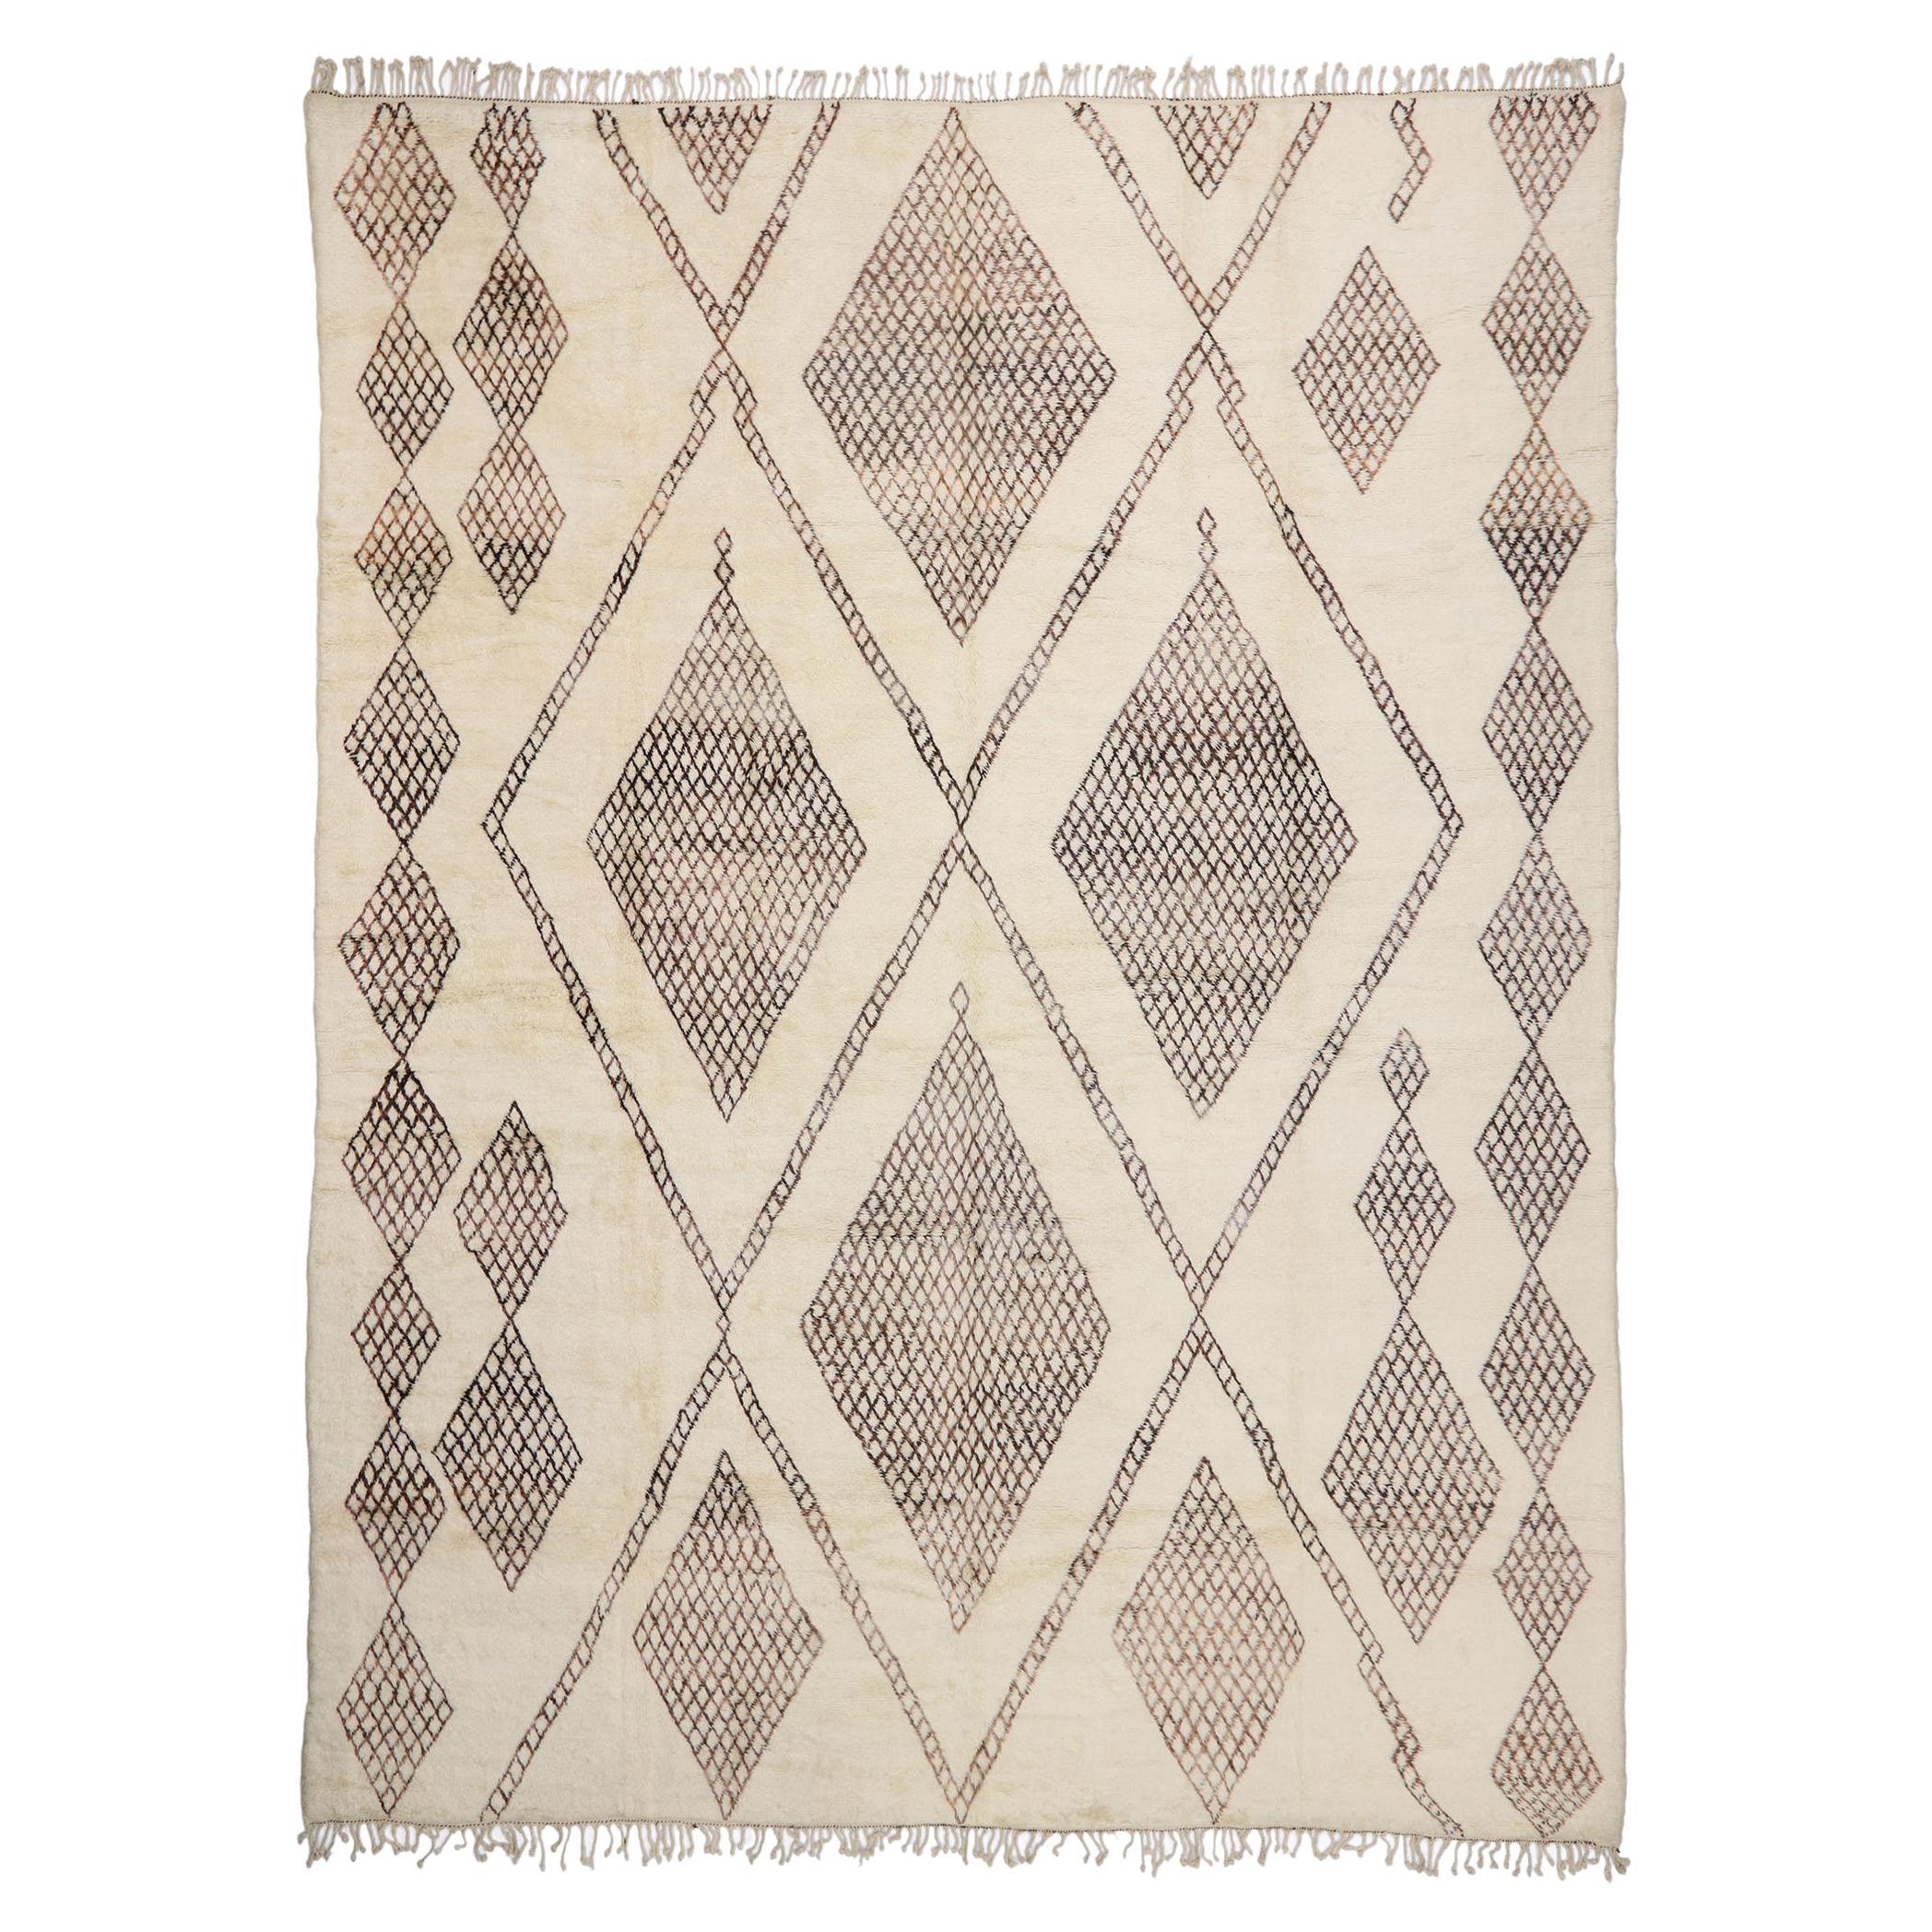 Oversized Neutral Berber Moroccan Rug, Cozy Hygge Meets Minimalist Shibui For Sale